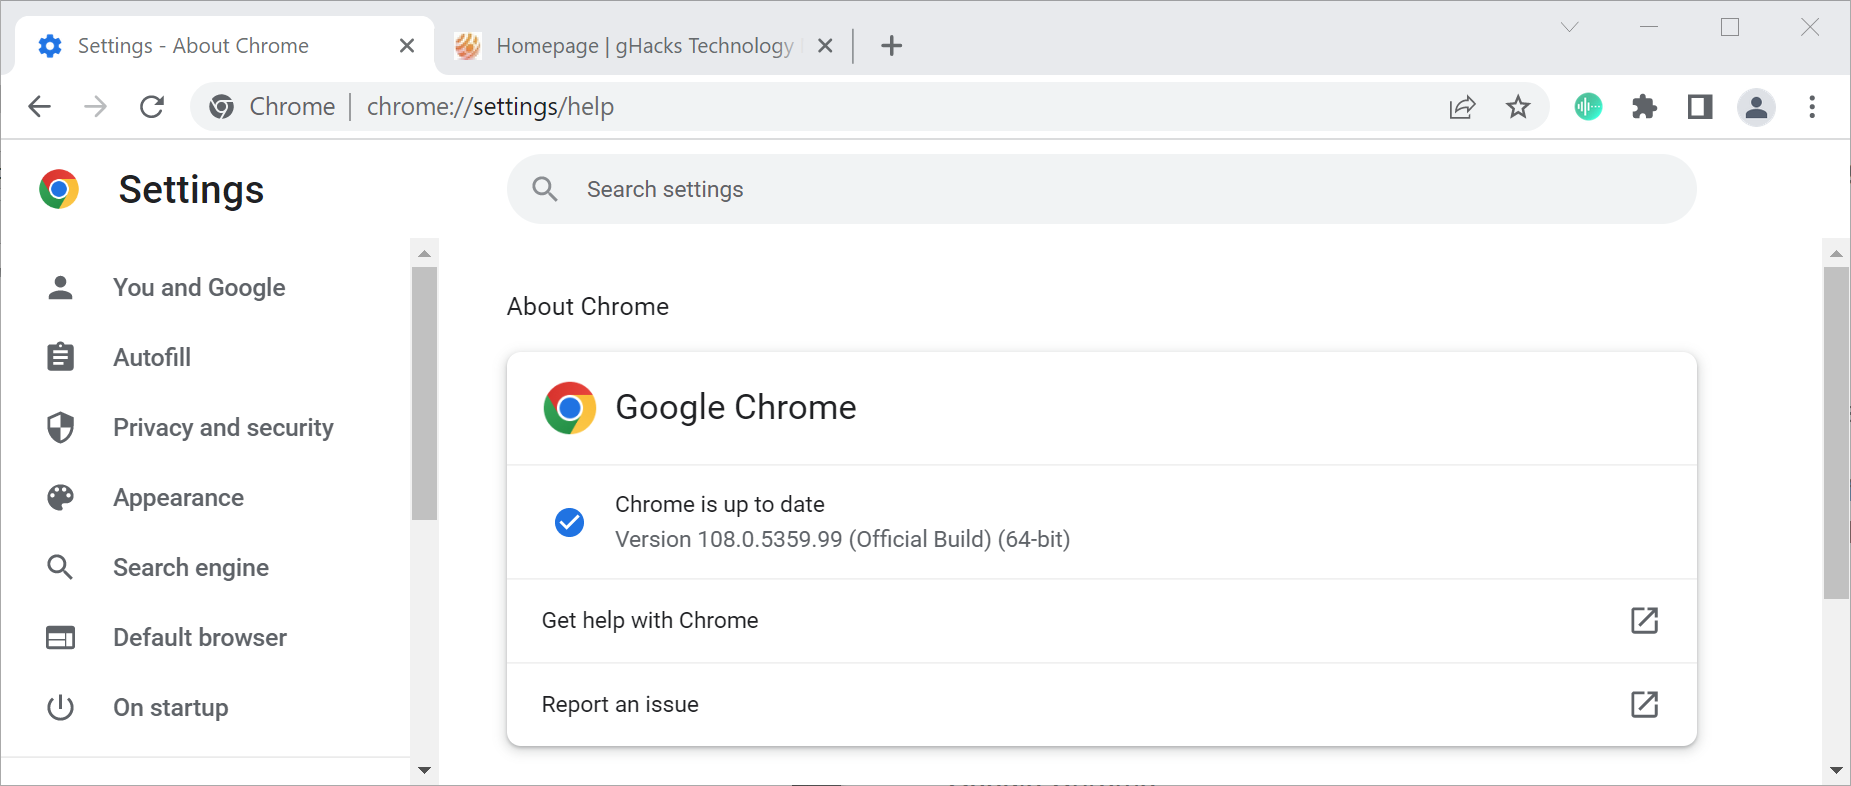 Google releases Chrome 108 update without revealing anything about it